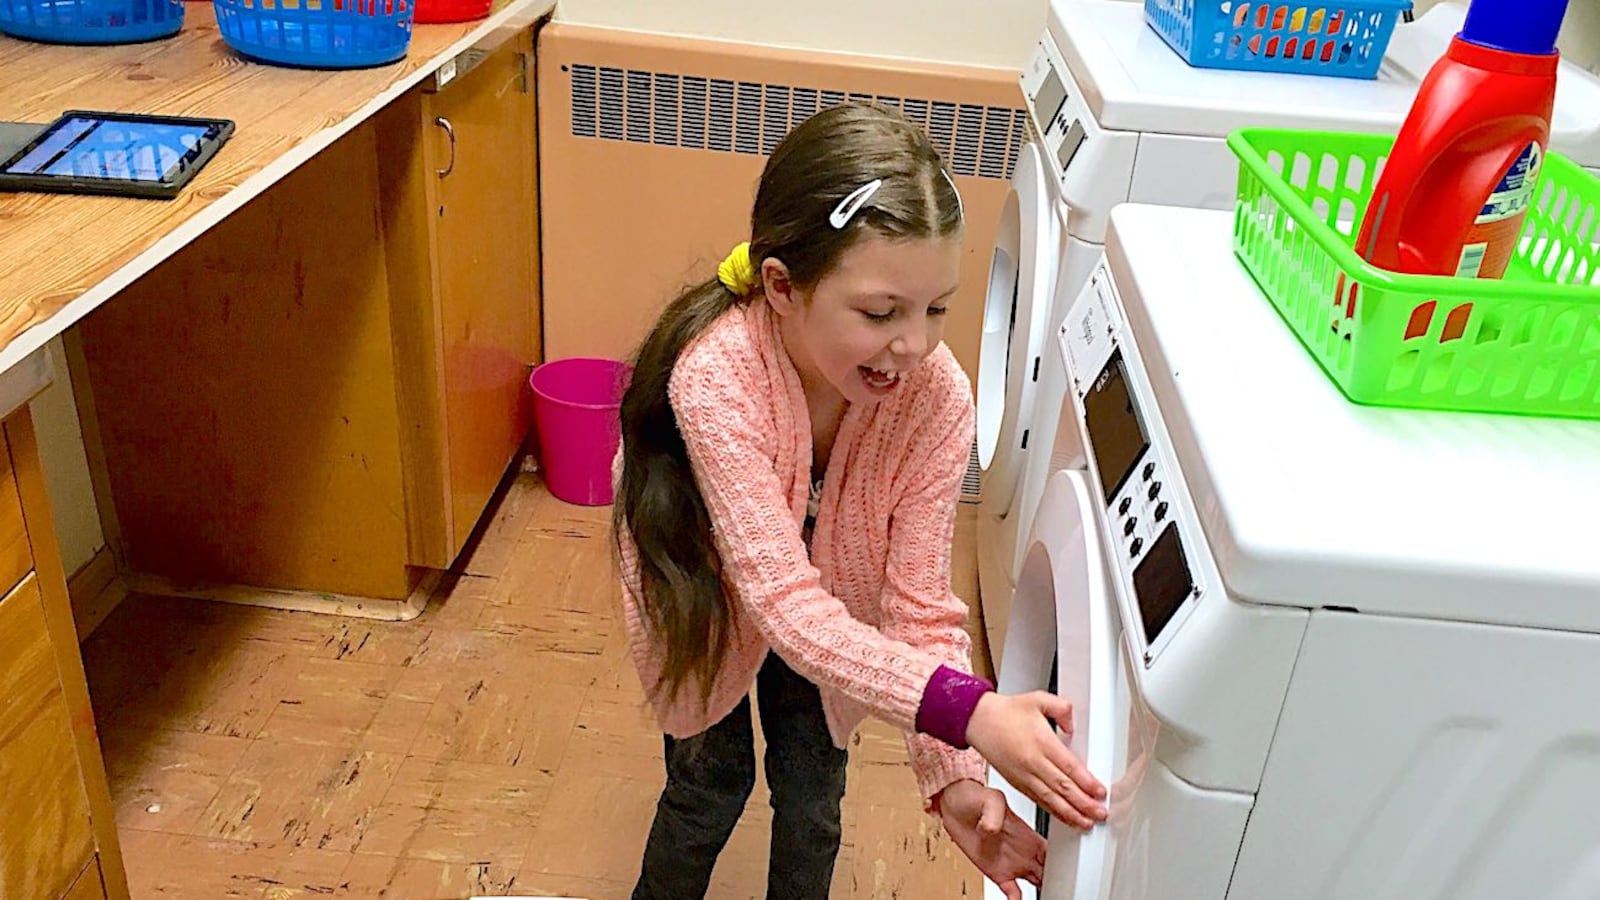 Morgan Pohl, a third-grader at Doull Elementary in Denver, prepares to do a load of laundry at school.